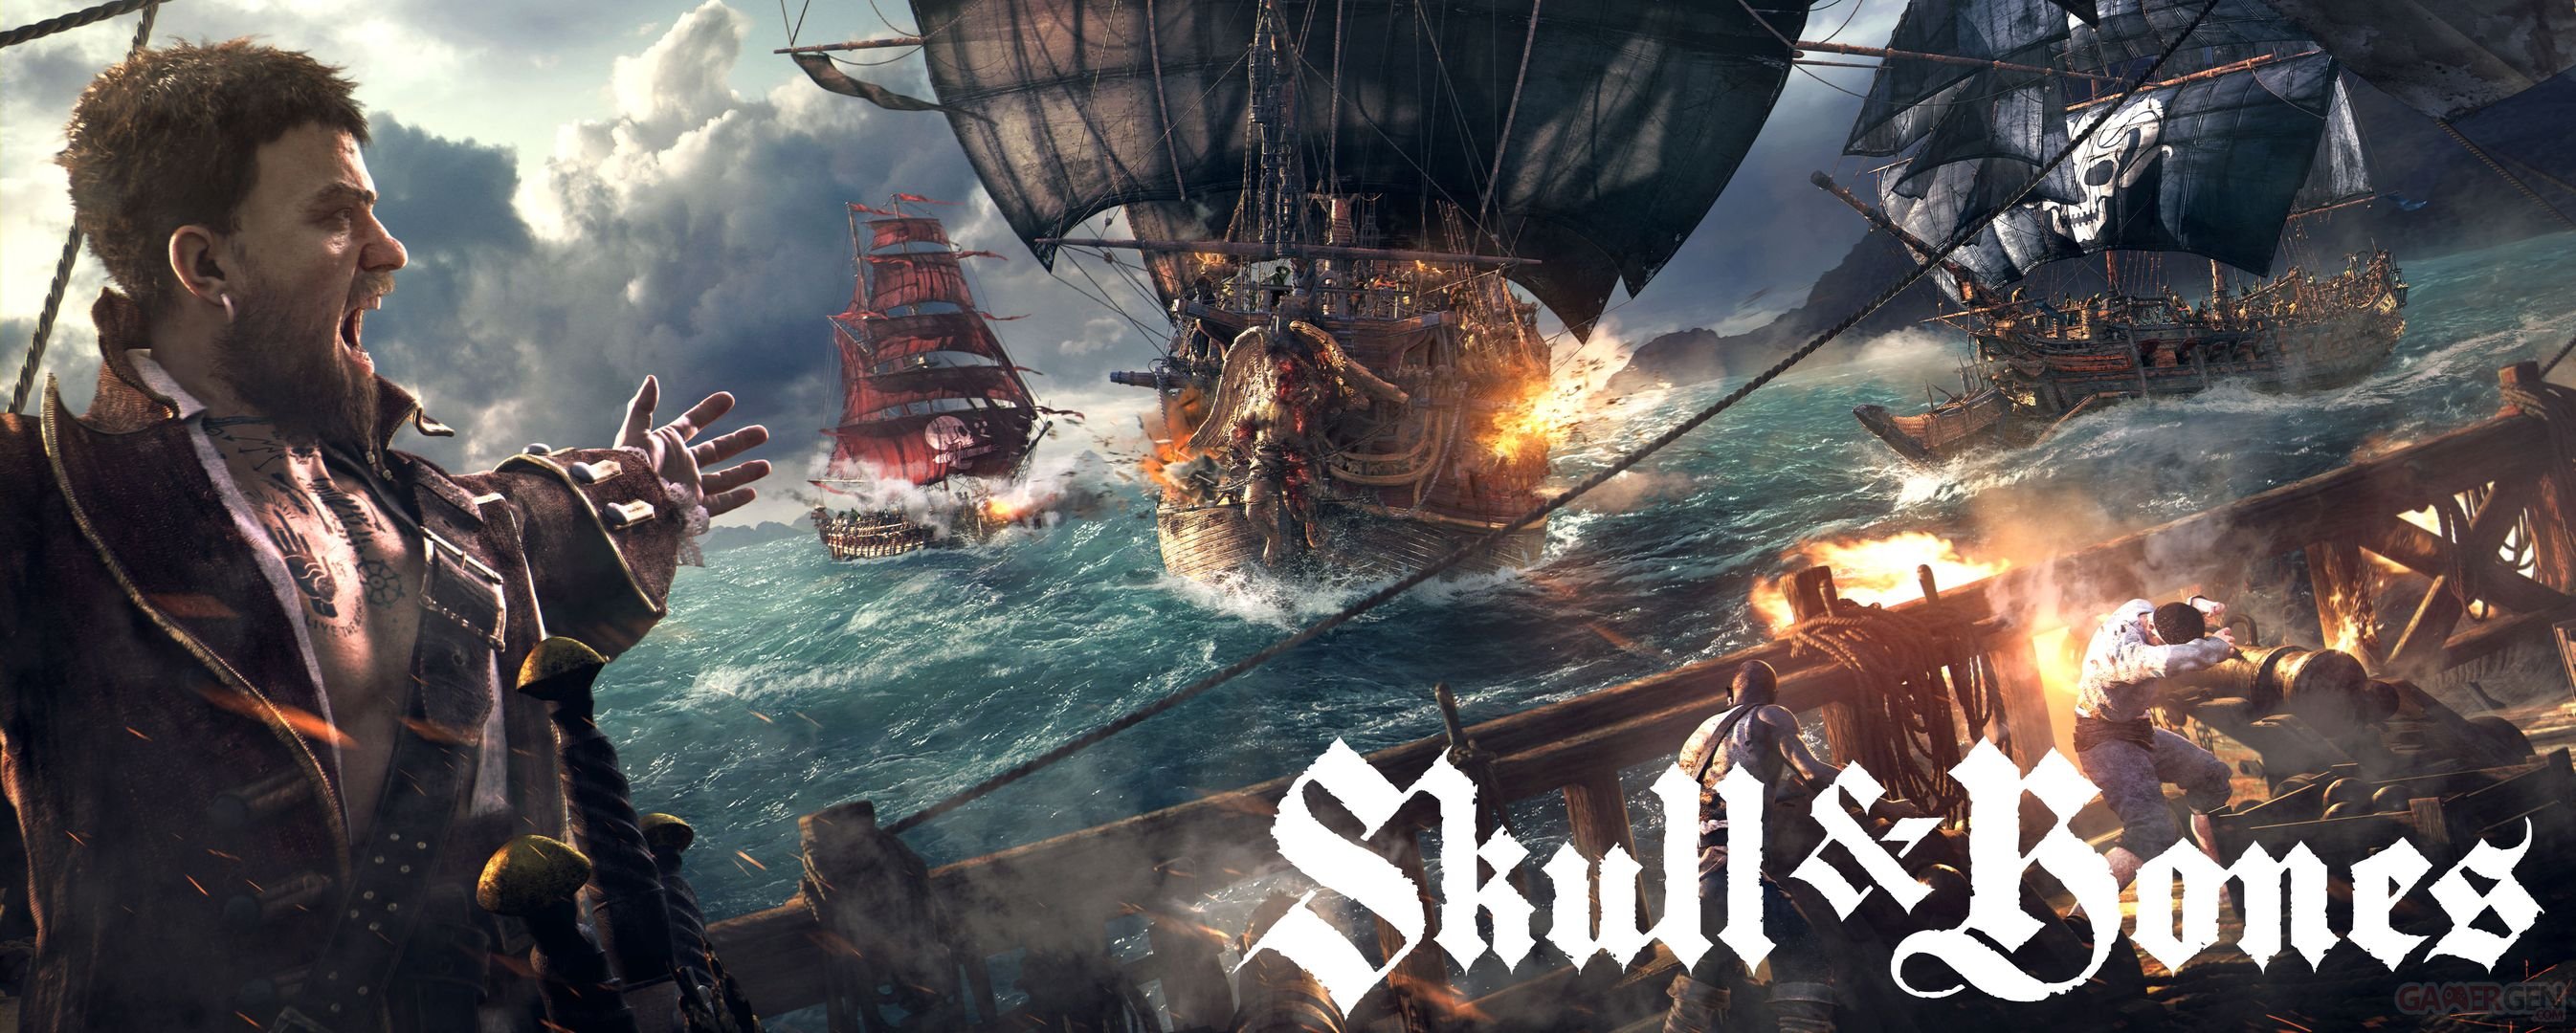 when does skull and bones come out